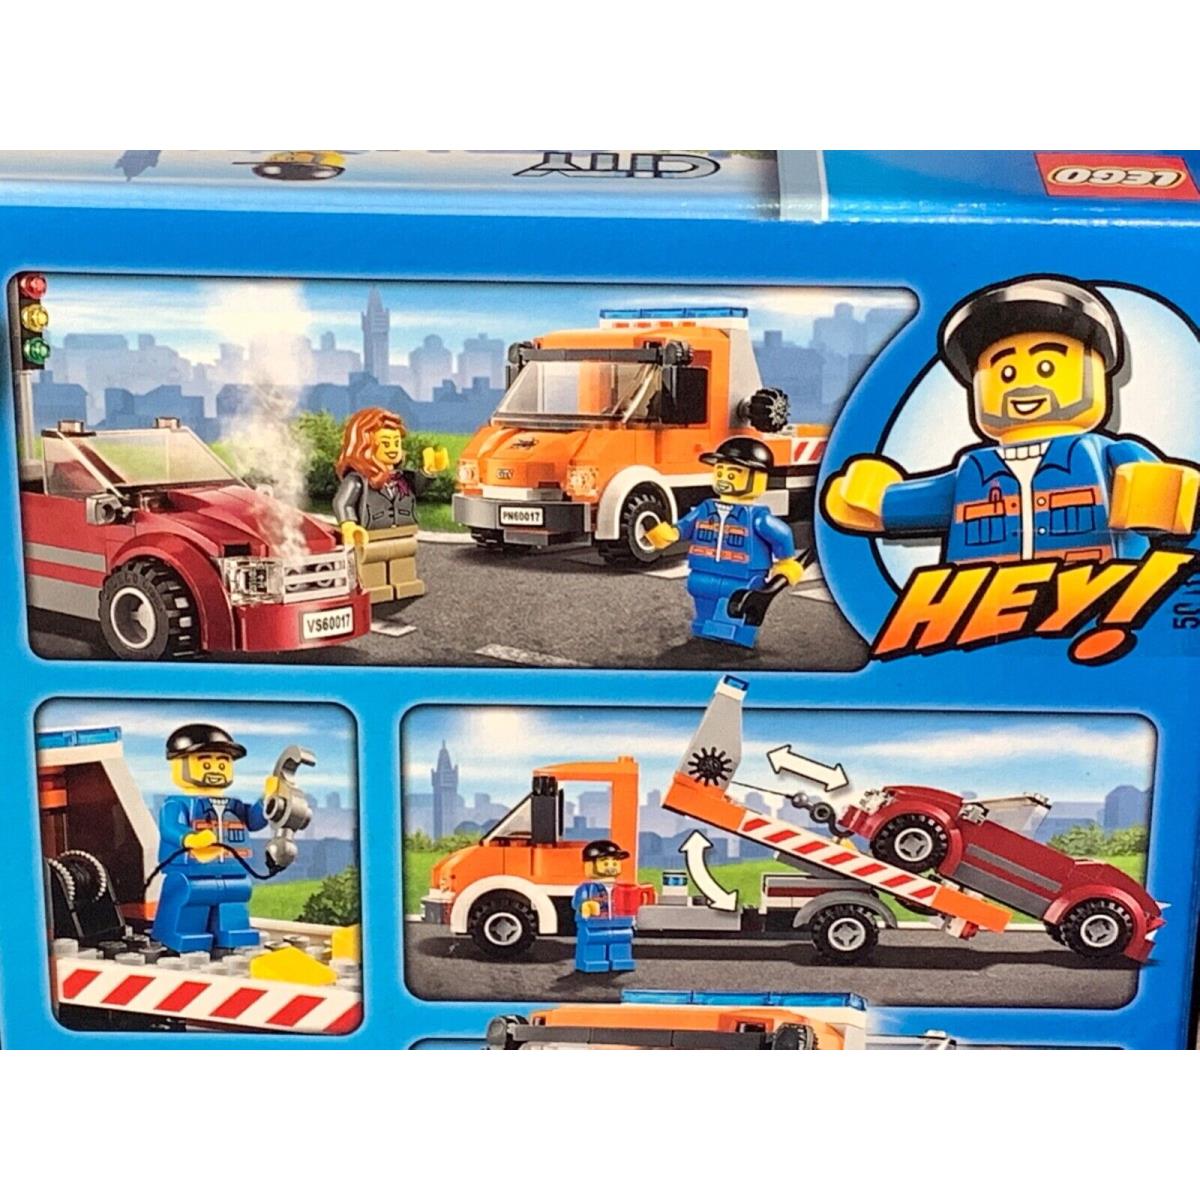 Lego toy Flatbed Truck